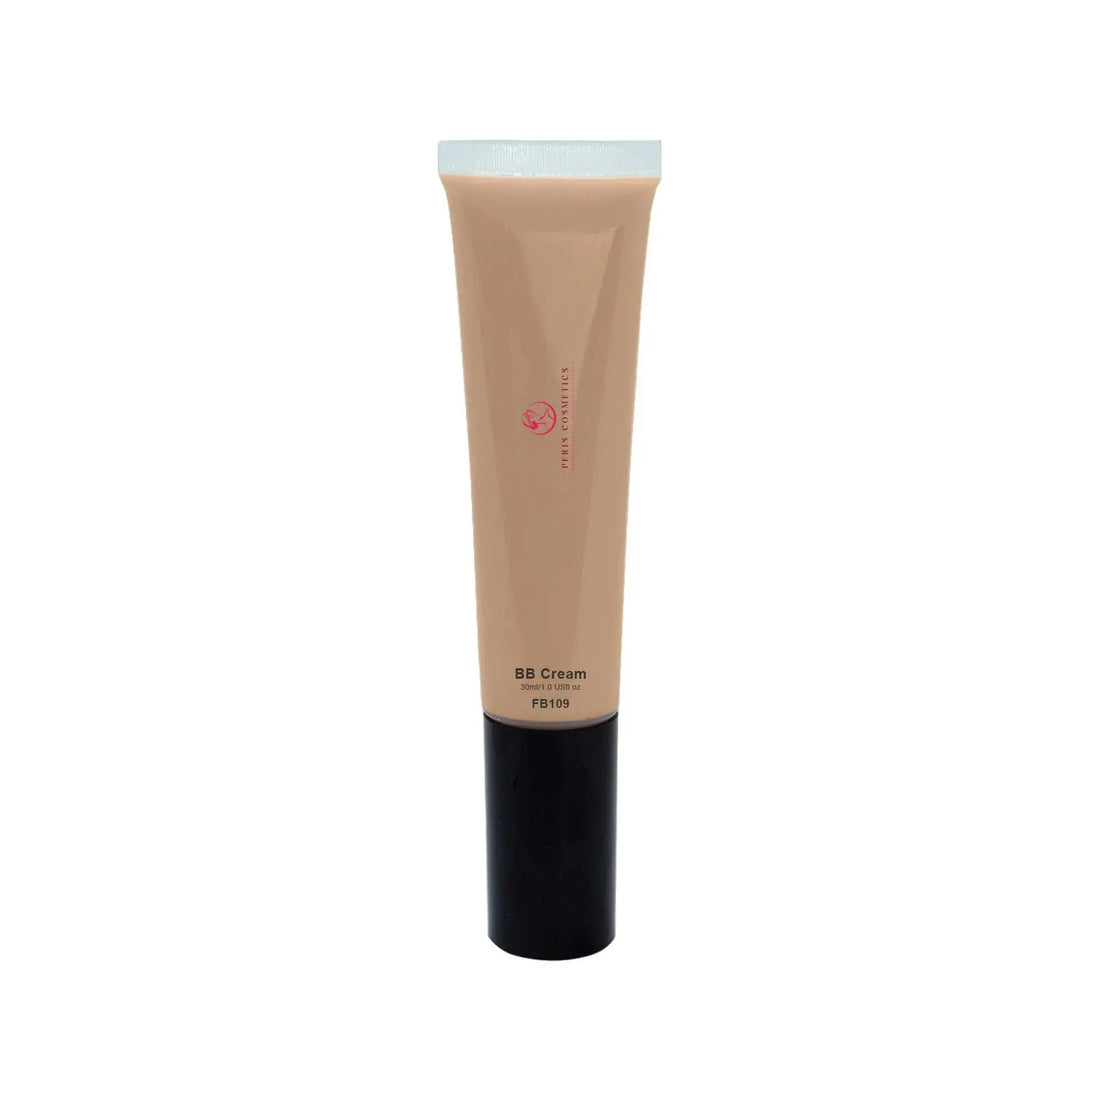 Peris Cosmetics Tan BB Cream with SPF: Hydration, Line Smoothing, and Sun Protection for Radiant Skin Kylie Cosmetics Amazon